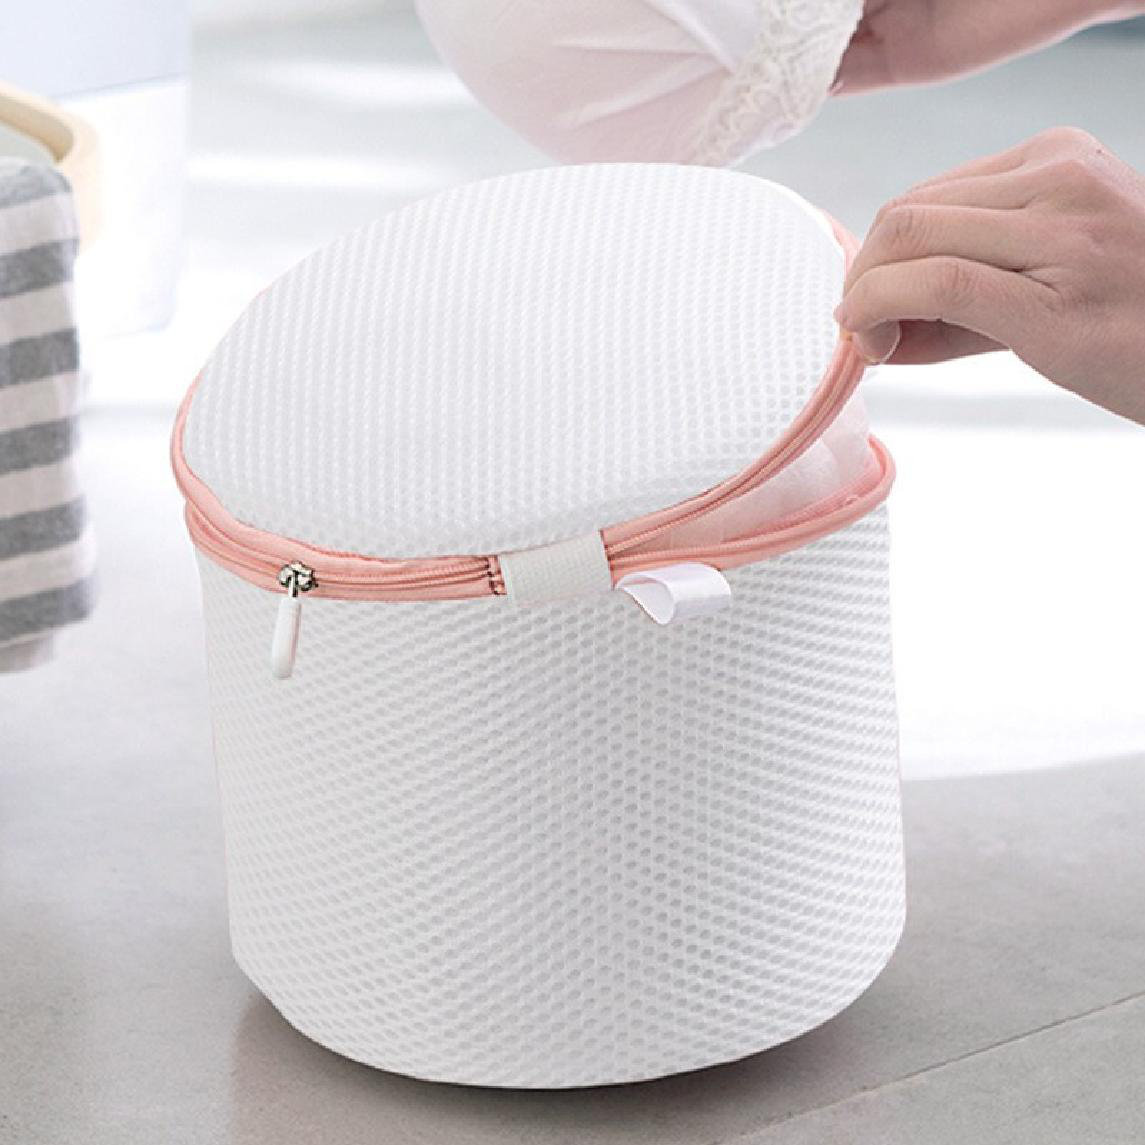 Bra Mesh Laundry Bags Anti-Deformation Lingerie Washing Bag With Handle For  Drying Zipper Closure For Washing Machine 